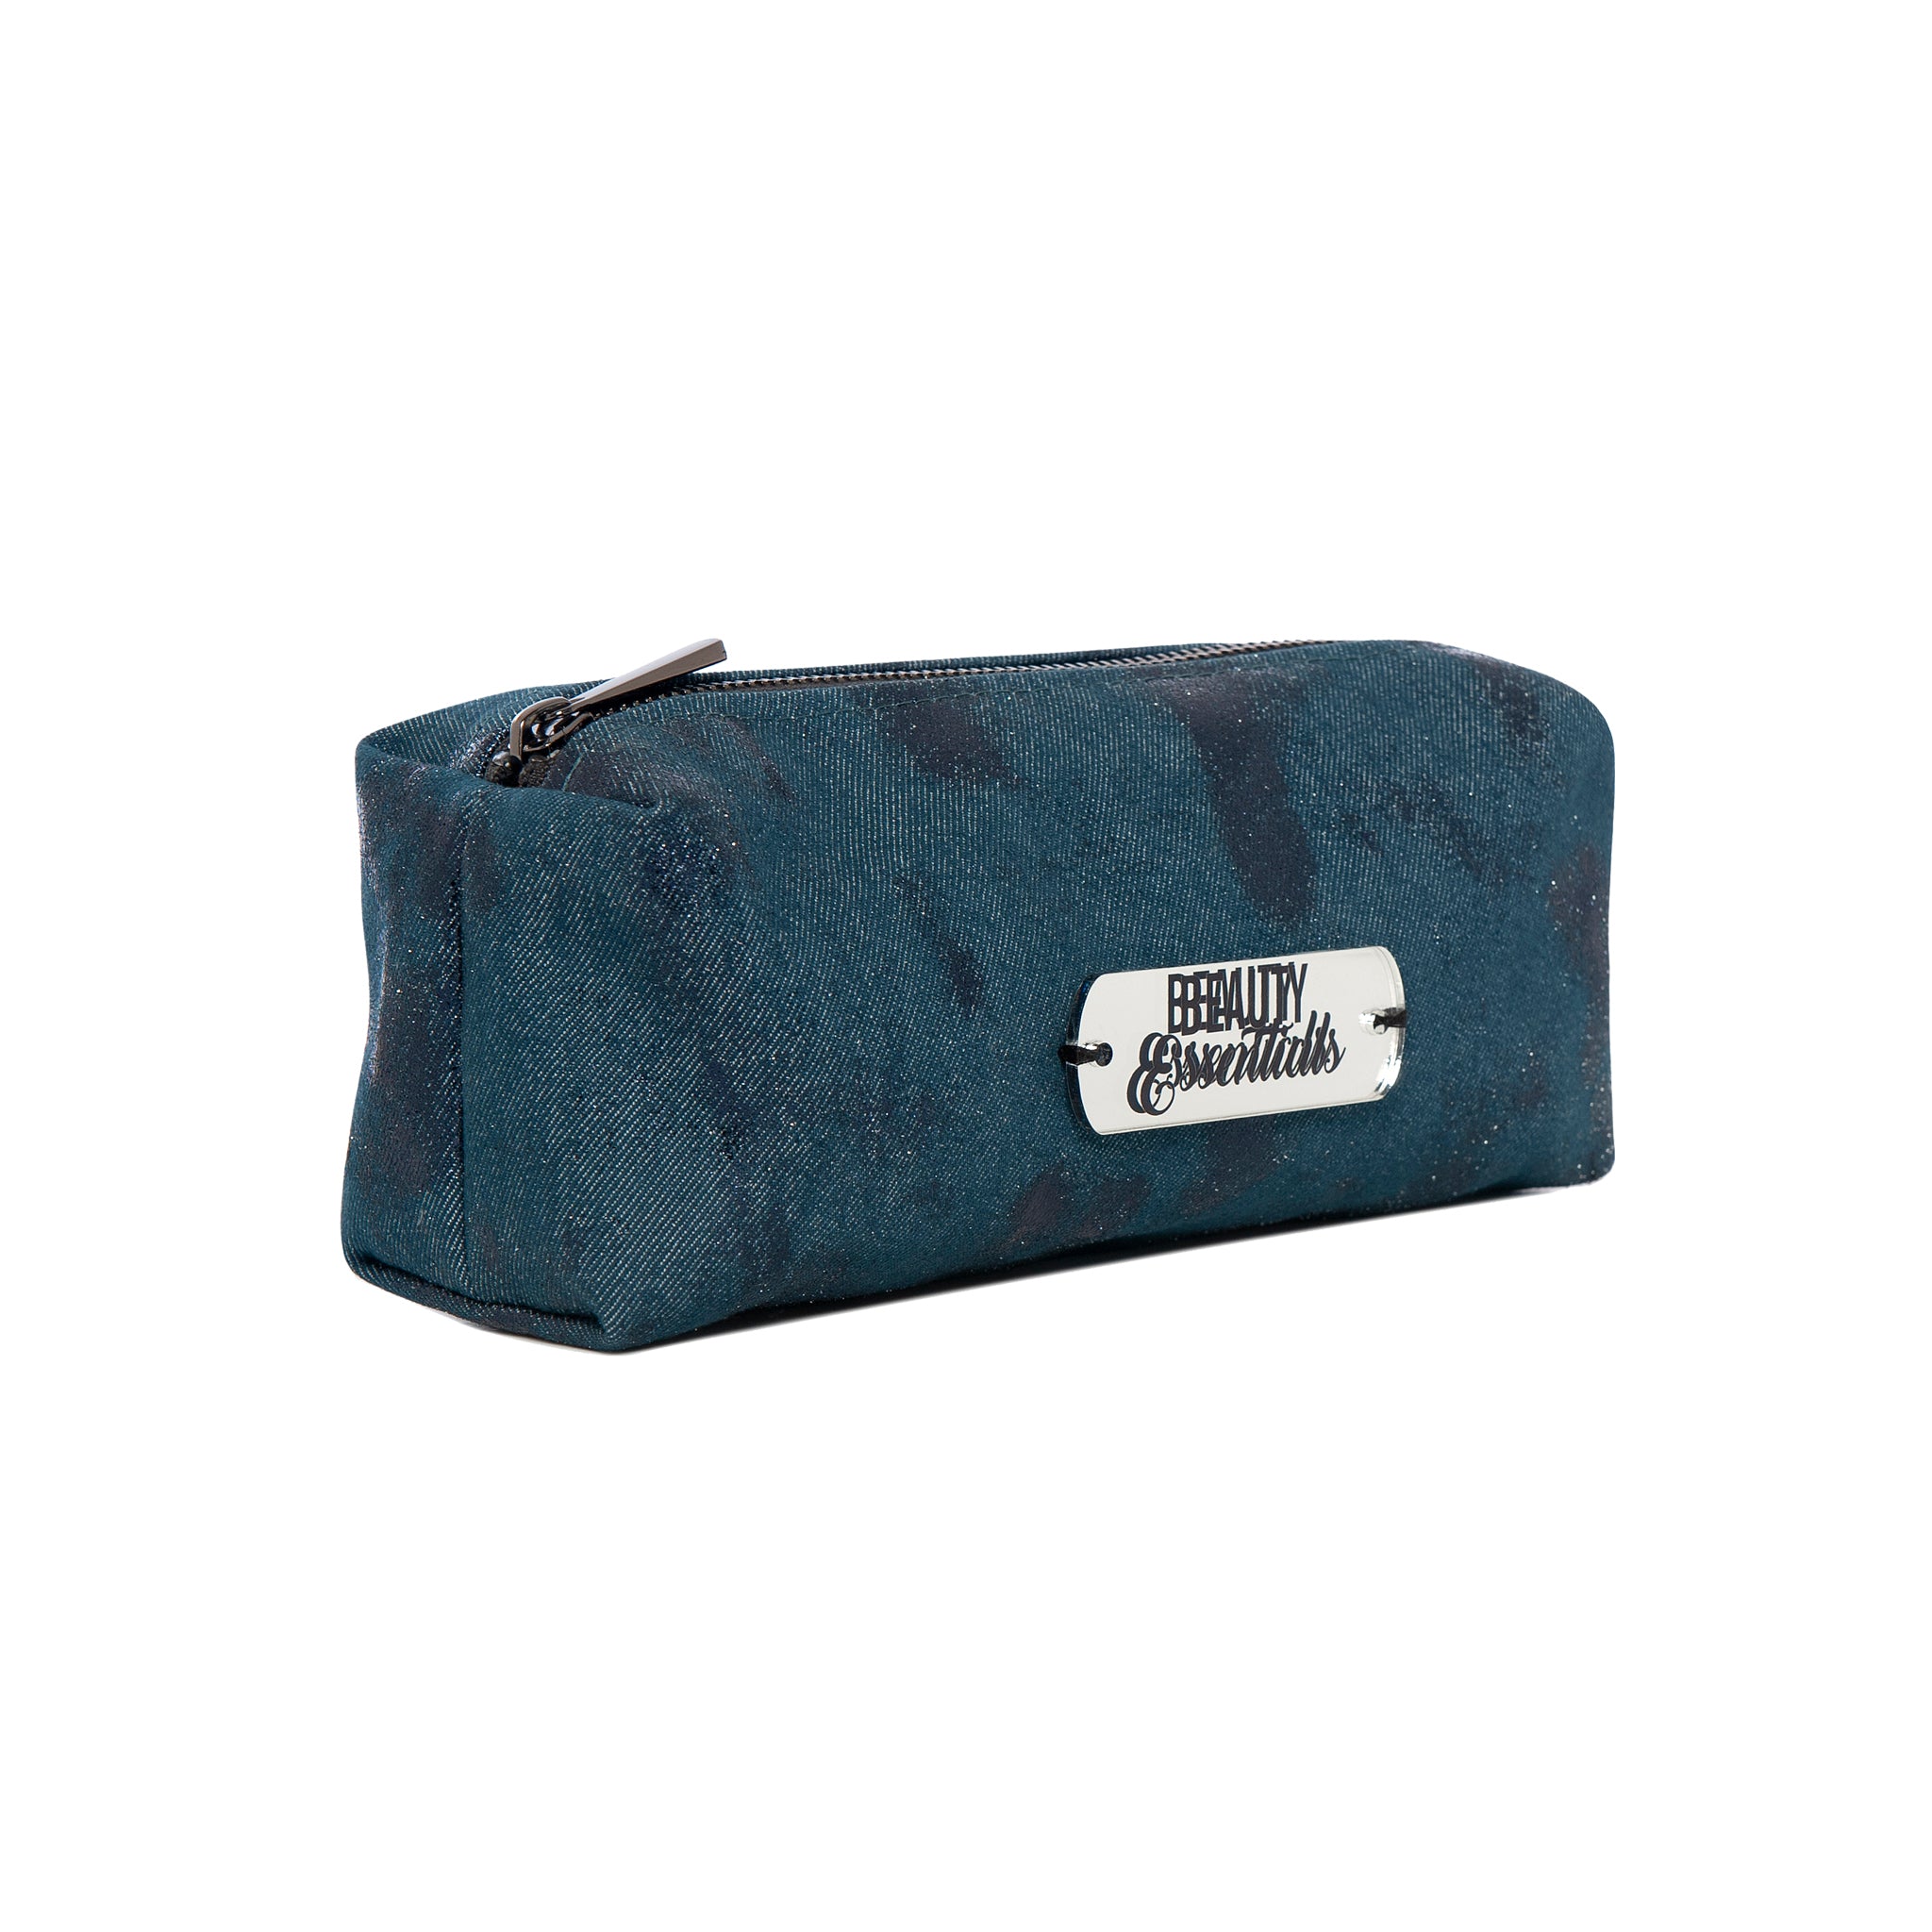 Jazz Pouch | Navy Shiny Canvas Beauty Essentials